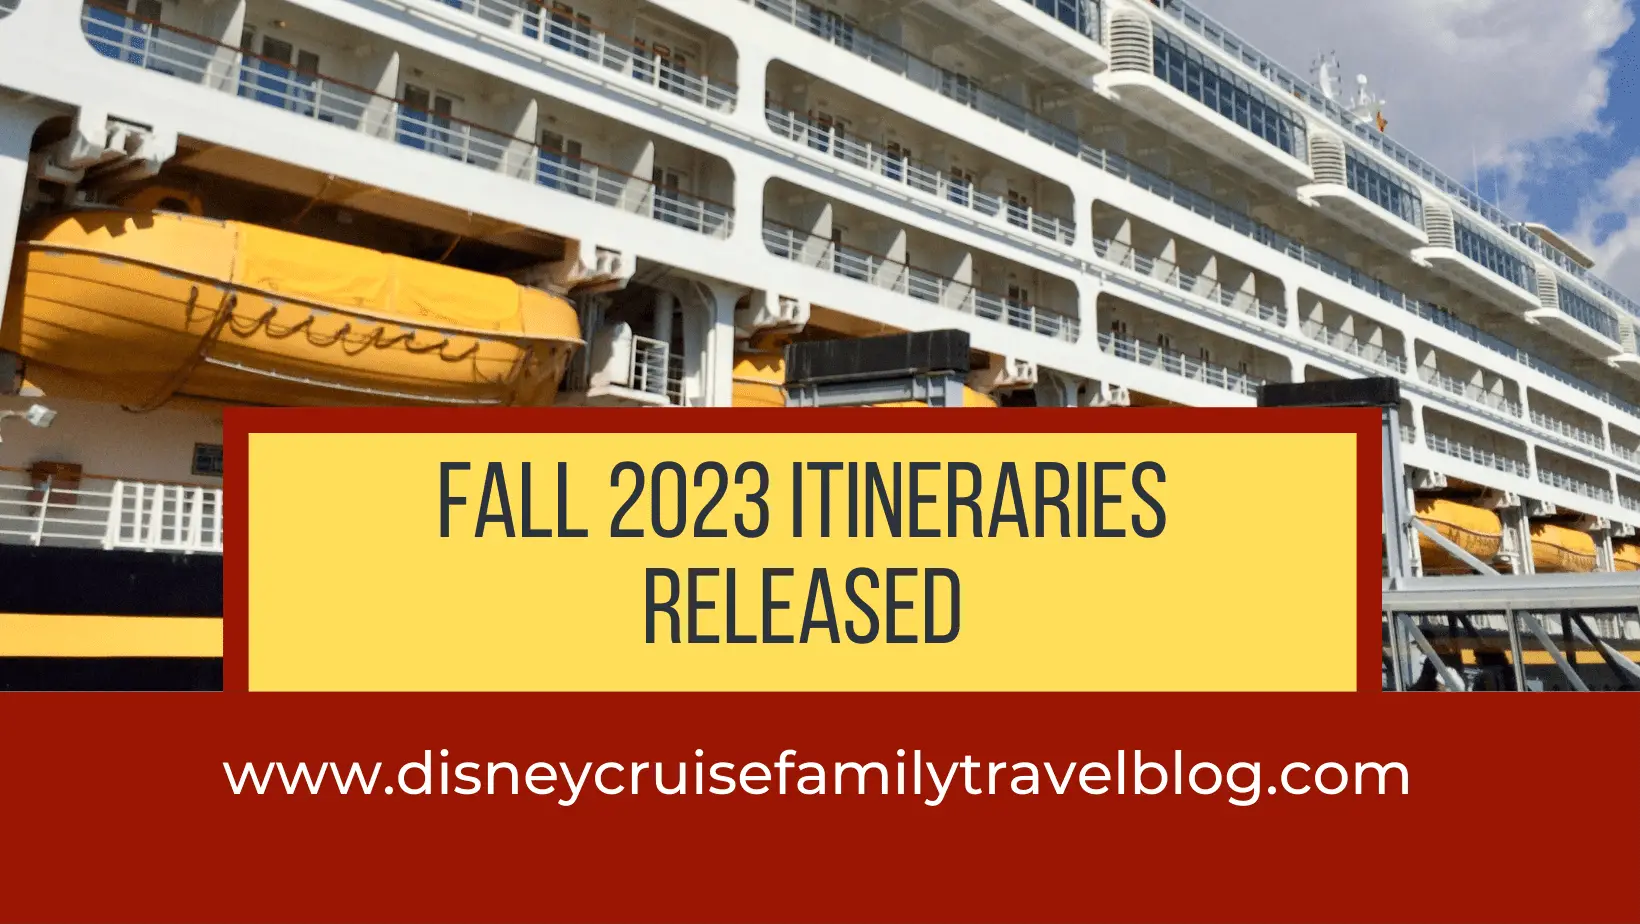 Fall 2023 Itineraries Released - The Disney Cruise Family Travel Blog